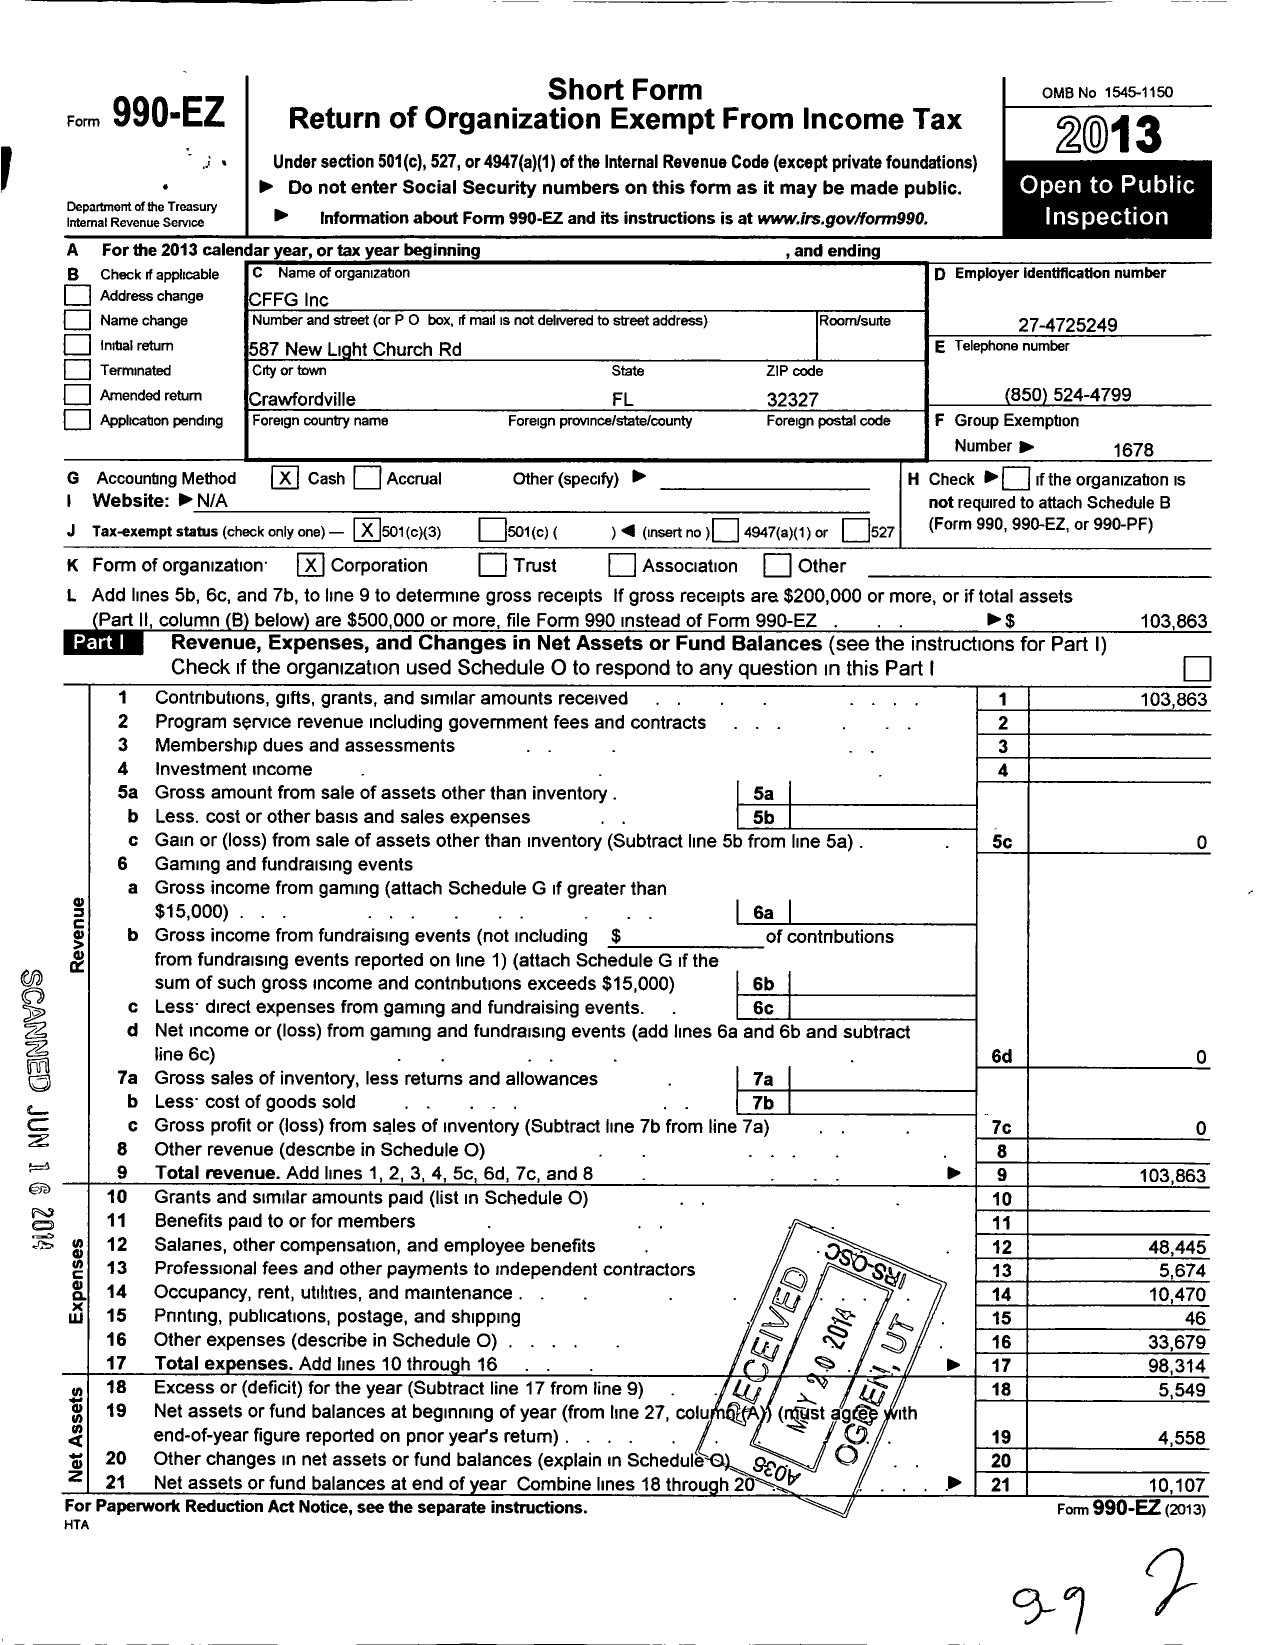 Image of first page of 2013 Form 990EZ for CFFG